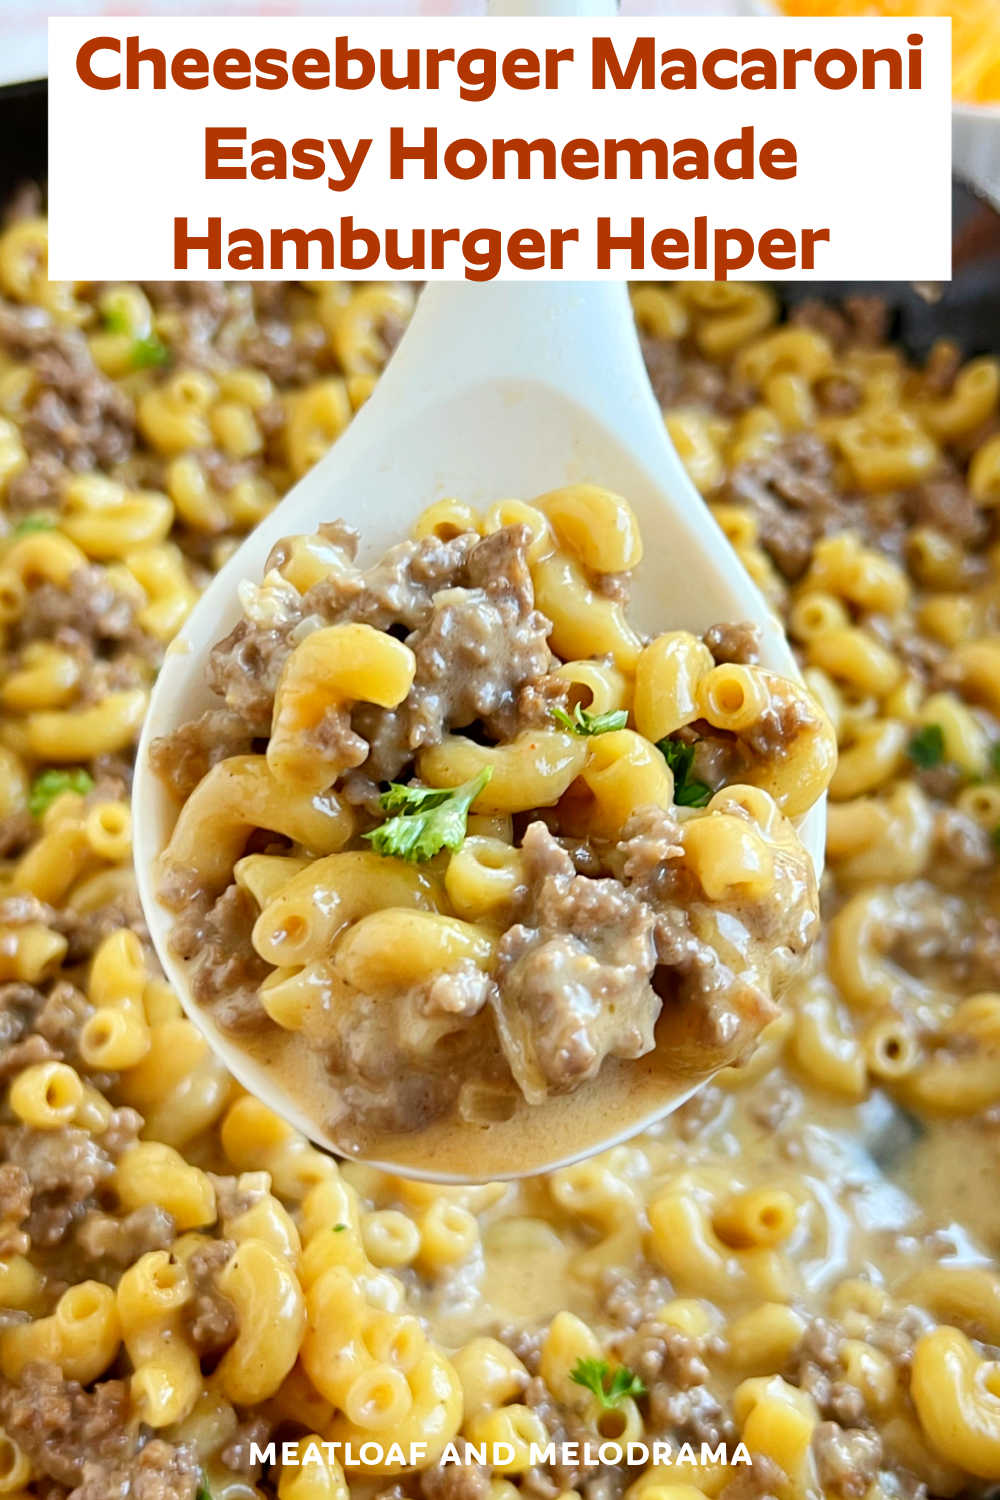 Cheeseburger Macaroni is an easy recipe for Homemade Hamburger Helper made with a pound of ground beef and pasta in a creamy cheese sauce. You only need one skillet and 30 minutes to make this easy dinner! via @meamel